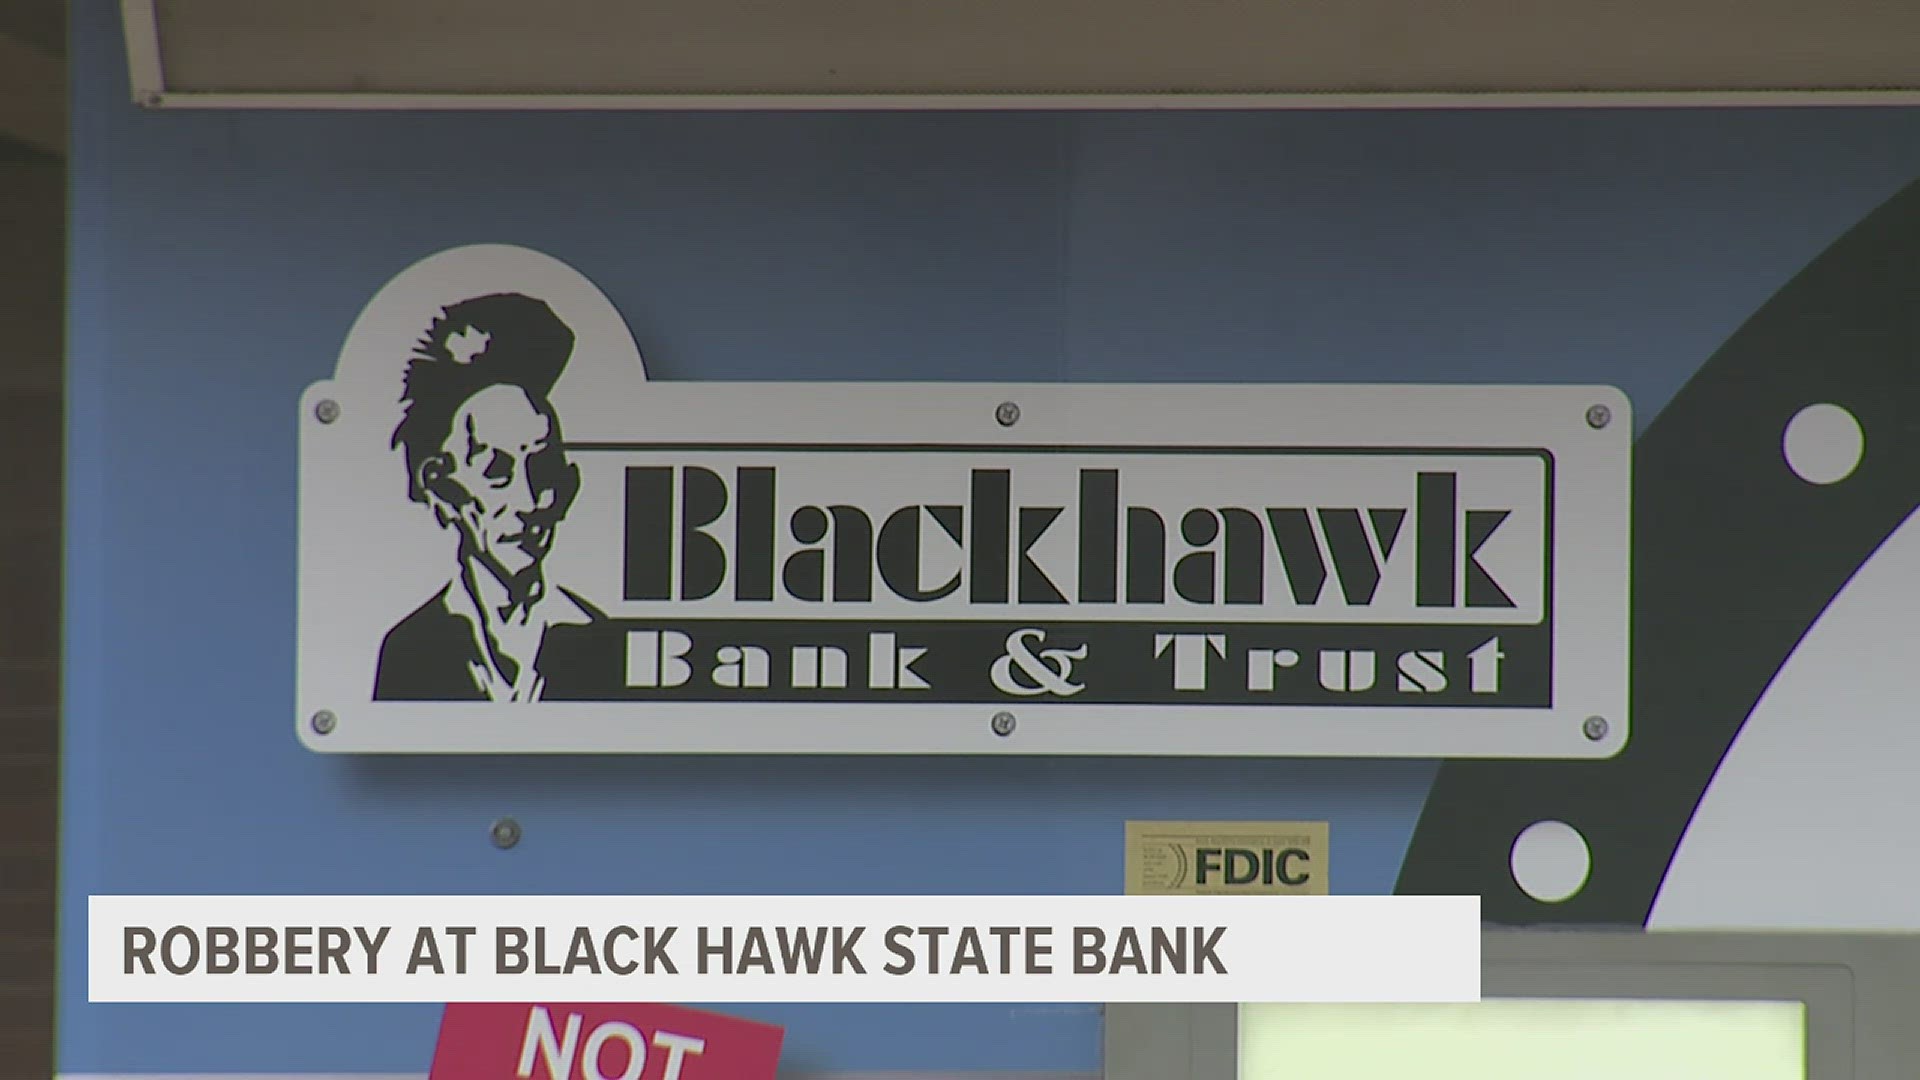 Police responded to Black Hawk State Bank on 1st Ave. at about 2 p.m. after the teen implied he had a gun, took money and fled.